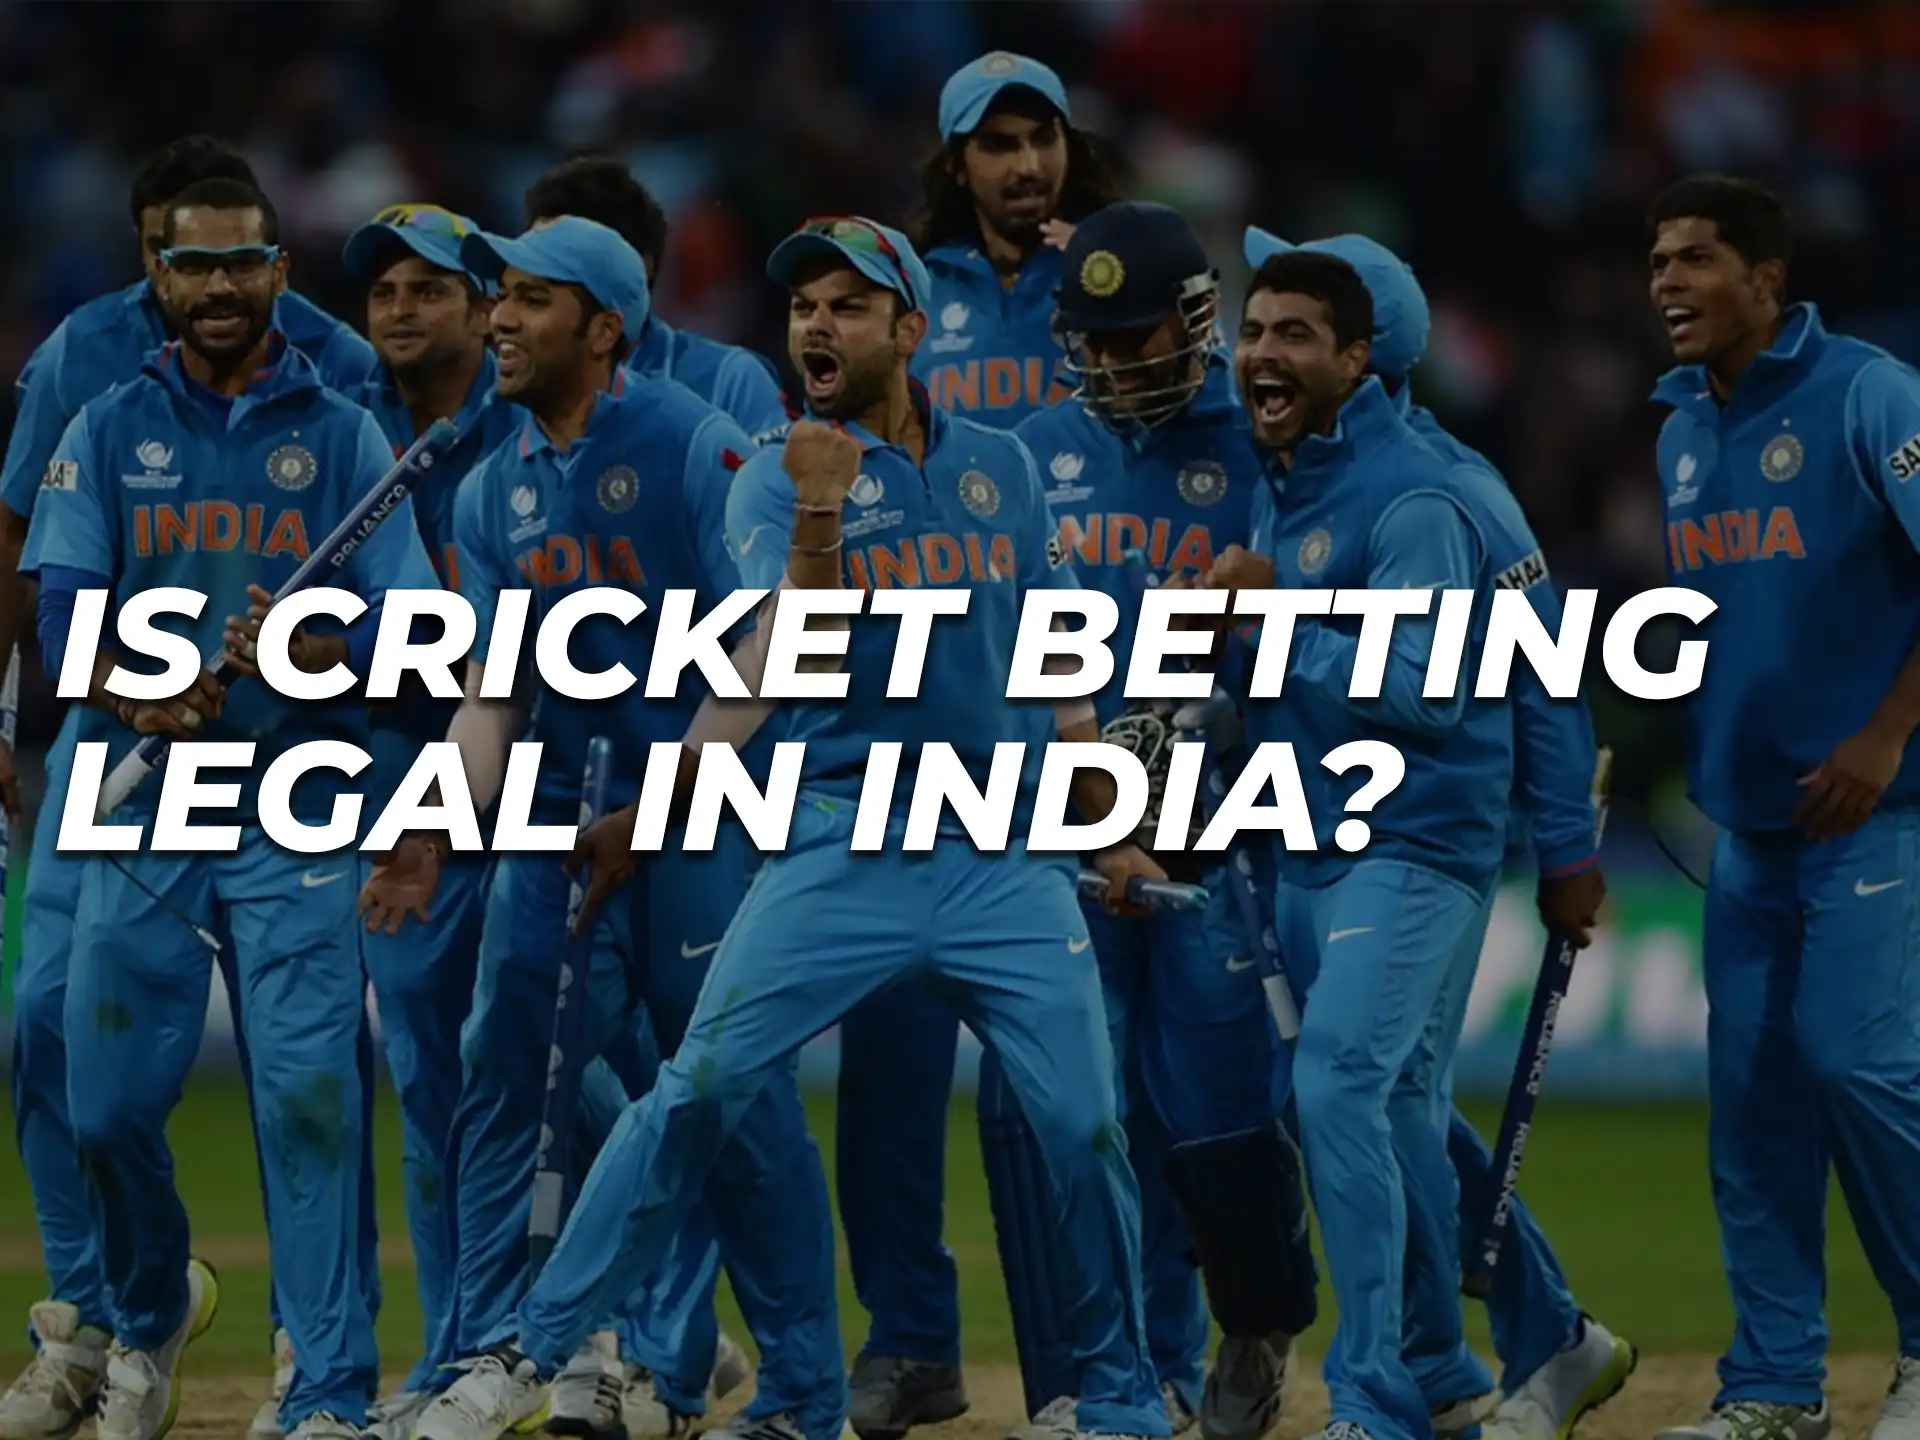 Betting and gambling are legal for Indian players.